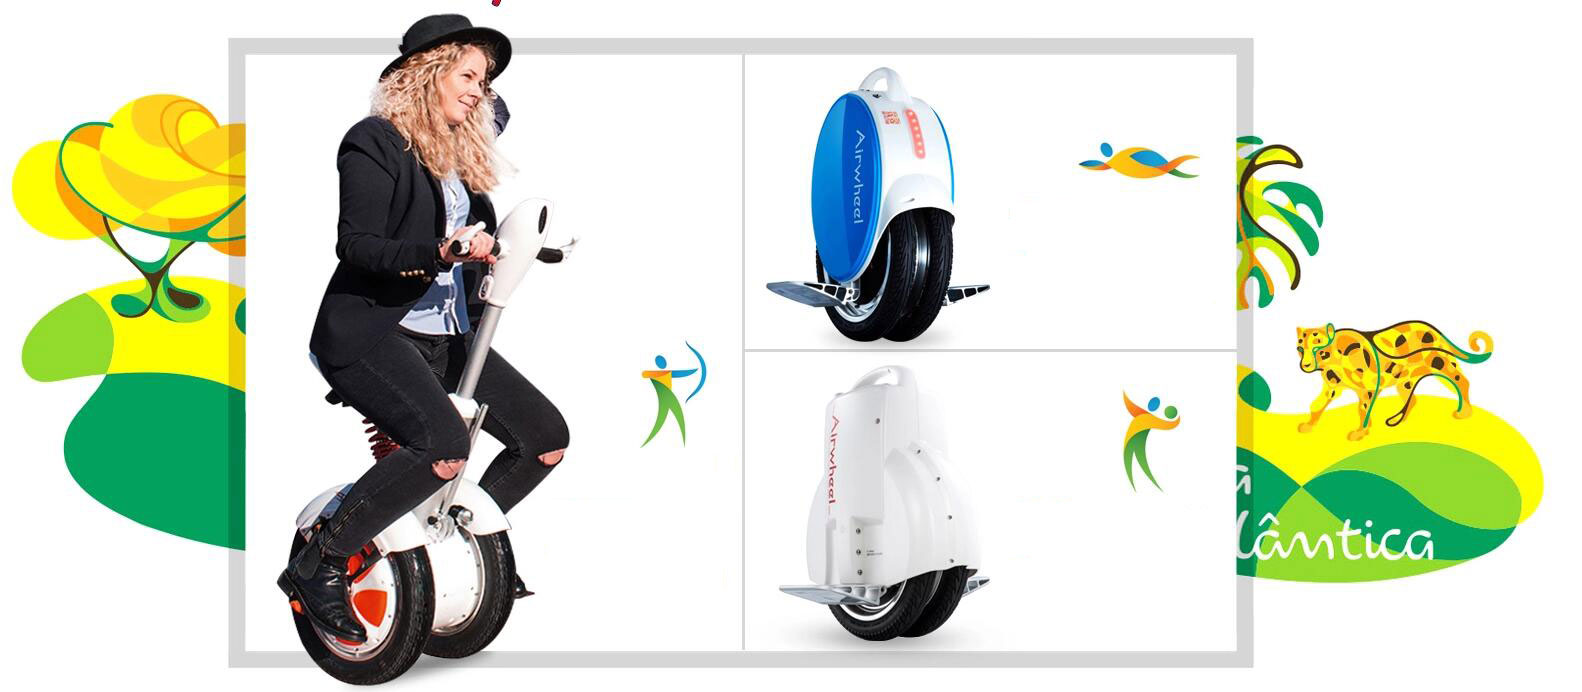 Electric Scooter Blog Airwheel Electric Scooter Environmental Friendly Transport